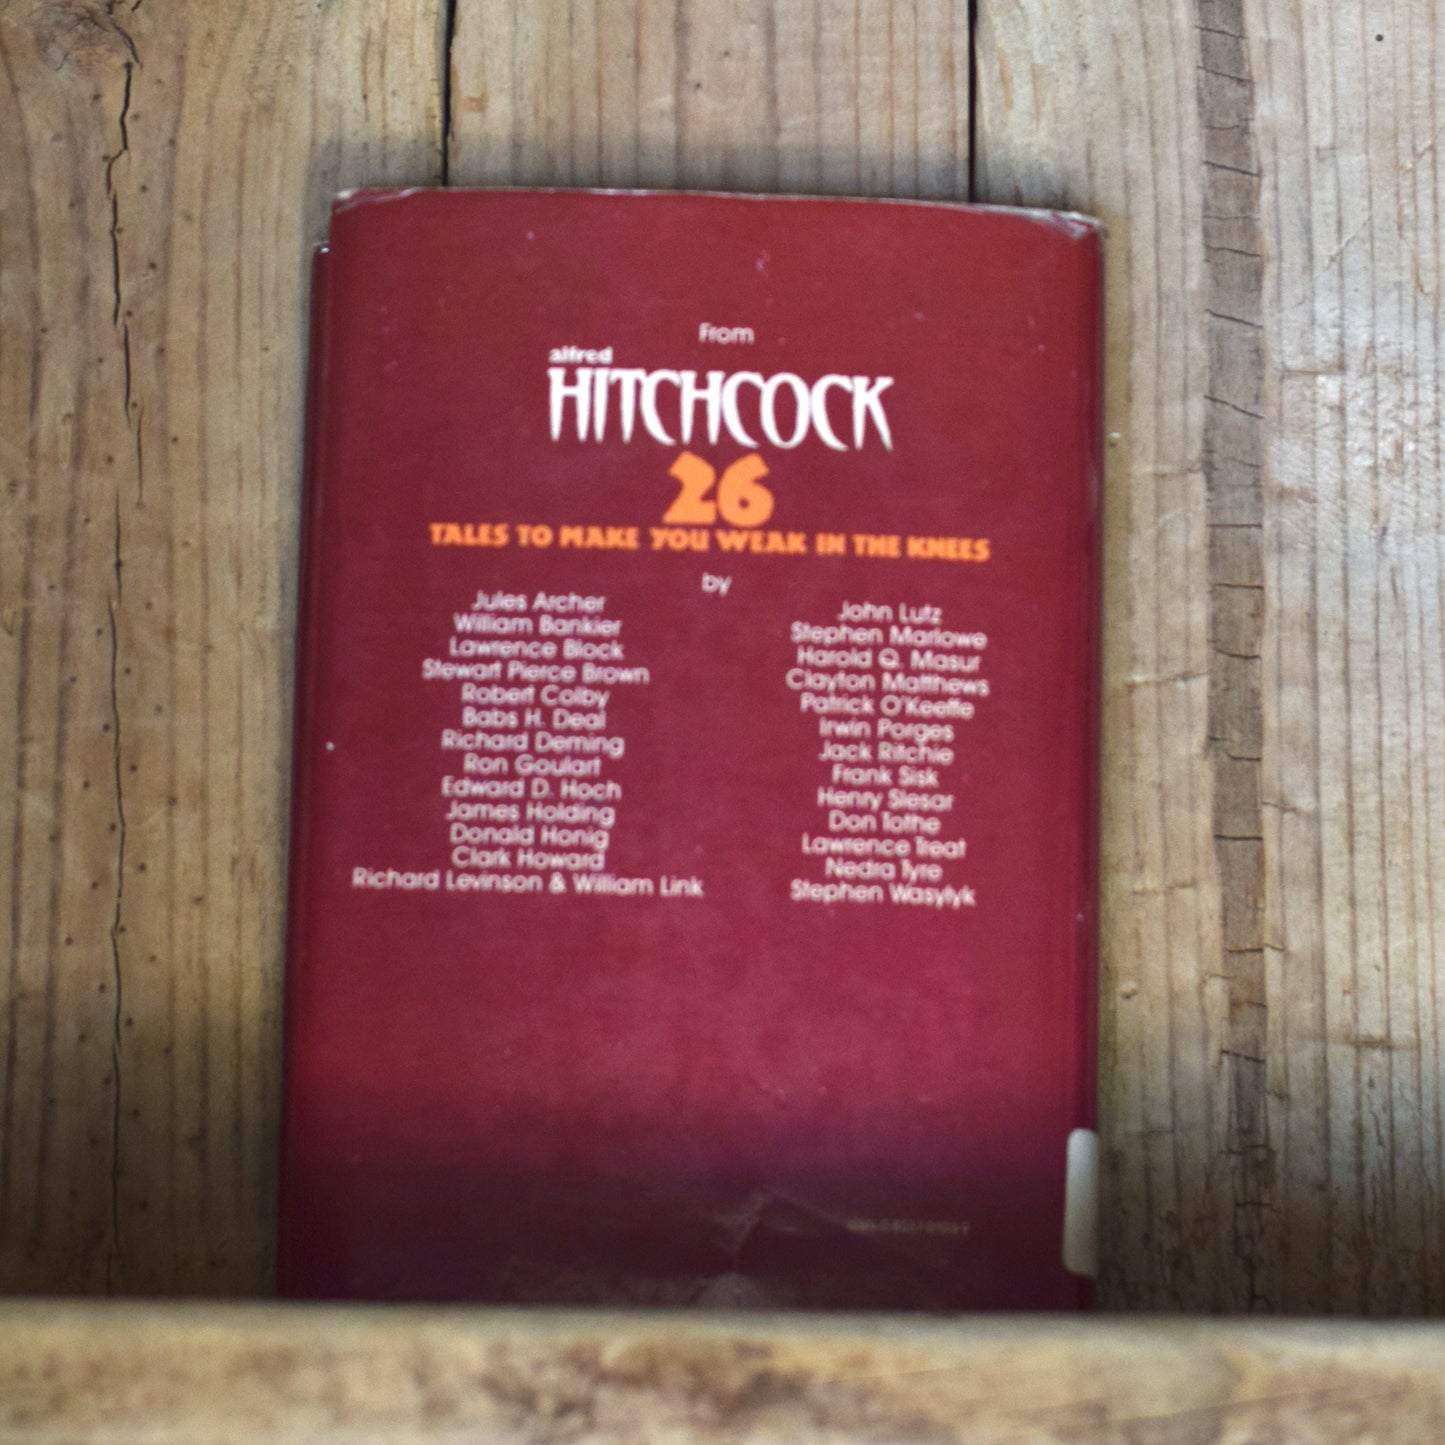 Vintage Horror Hardback: Alfred Hitchcock's Tales To Make You Weak In The Knees FIRST PRINTING